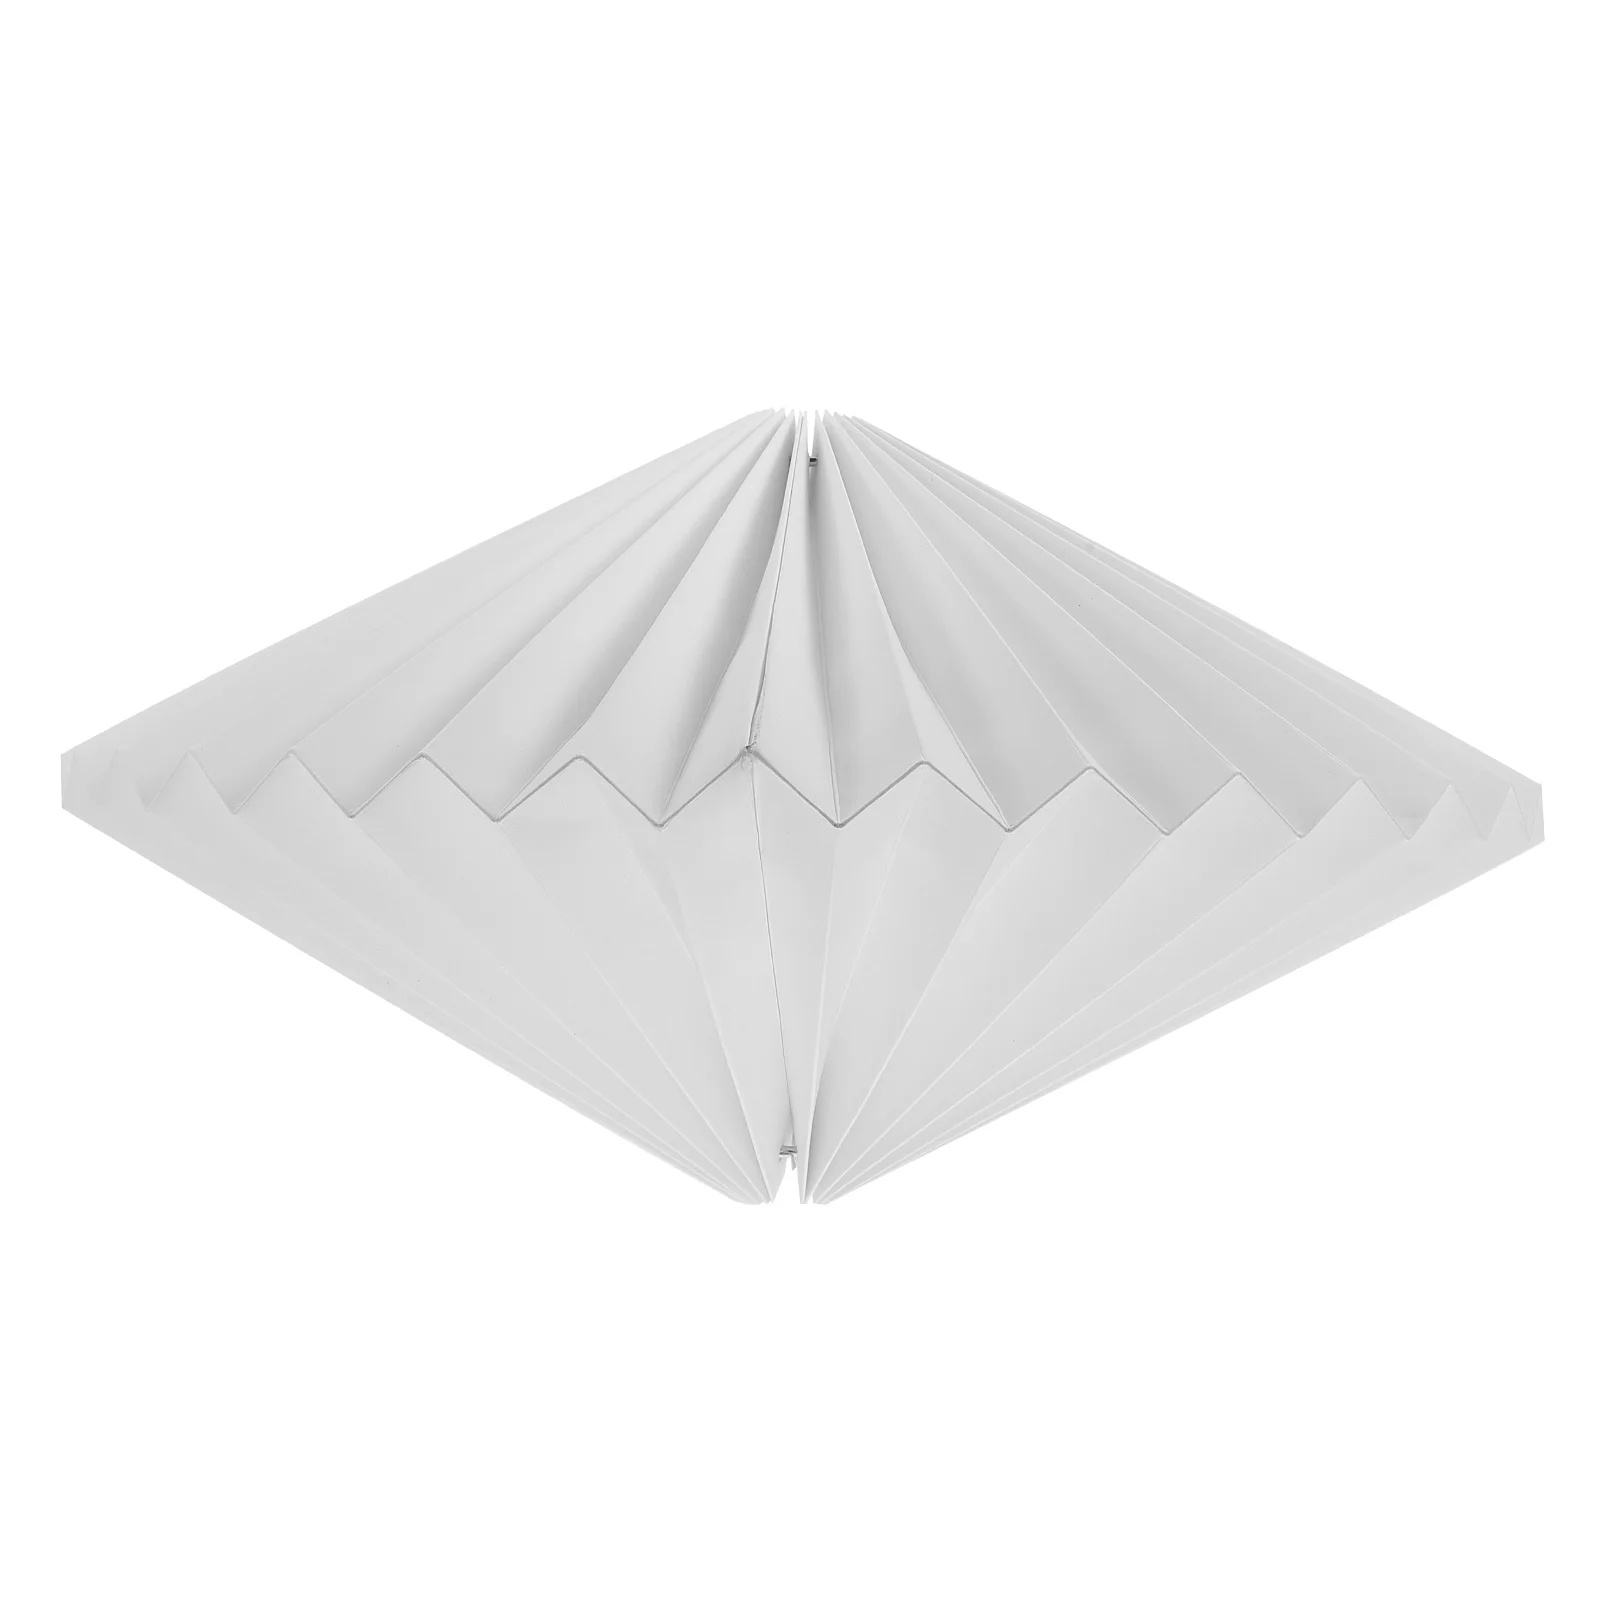 

Origami Lantern Shade Lamp Shades Floor Lamps Folding Paper Light Cover Decorative Lampshade Foldable Ceiling screen